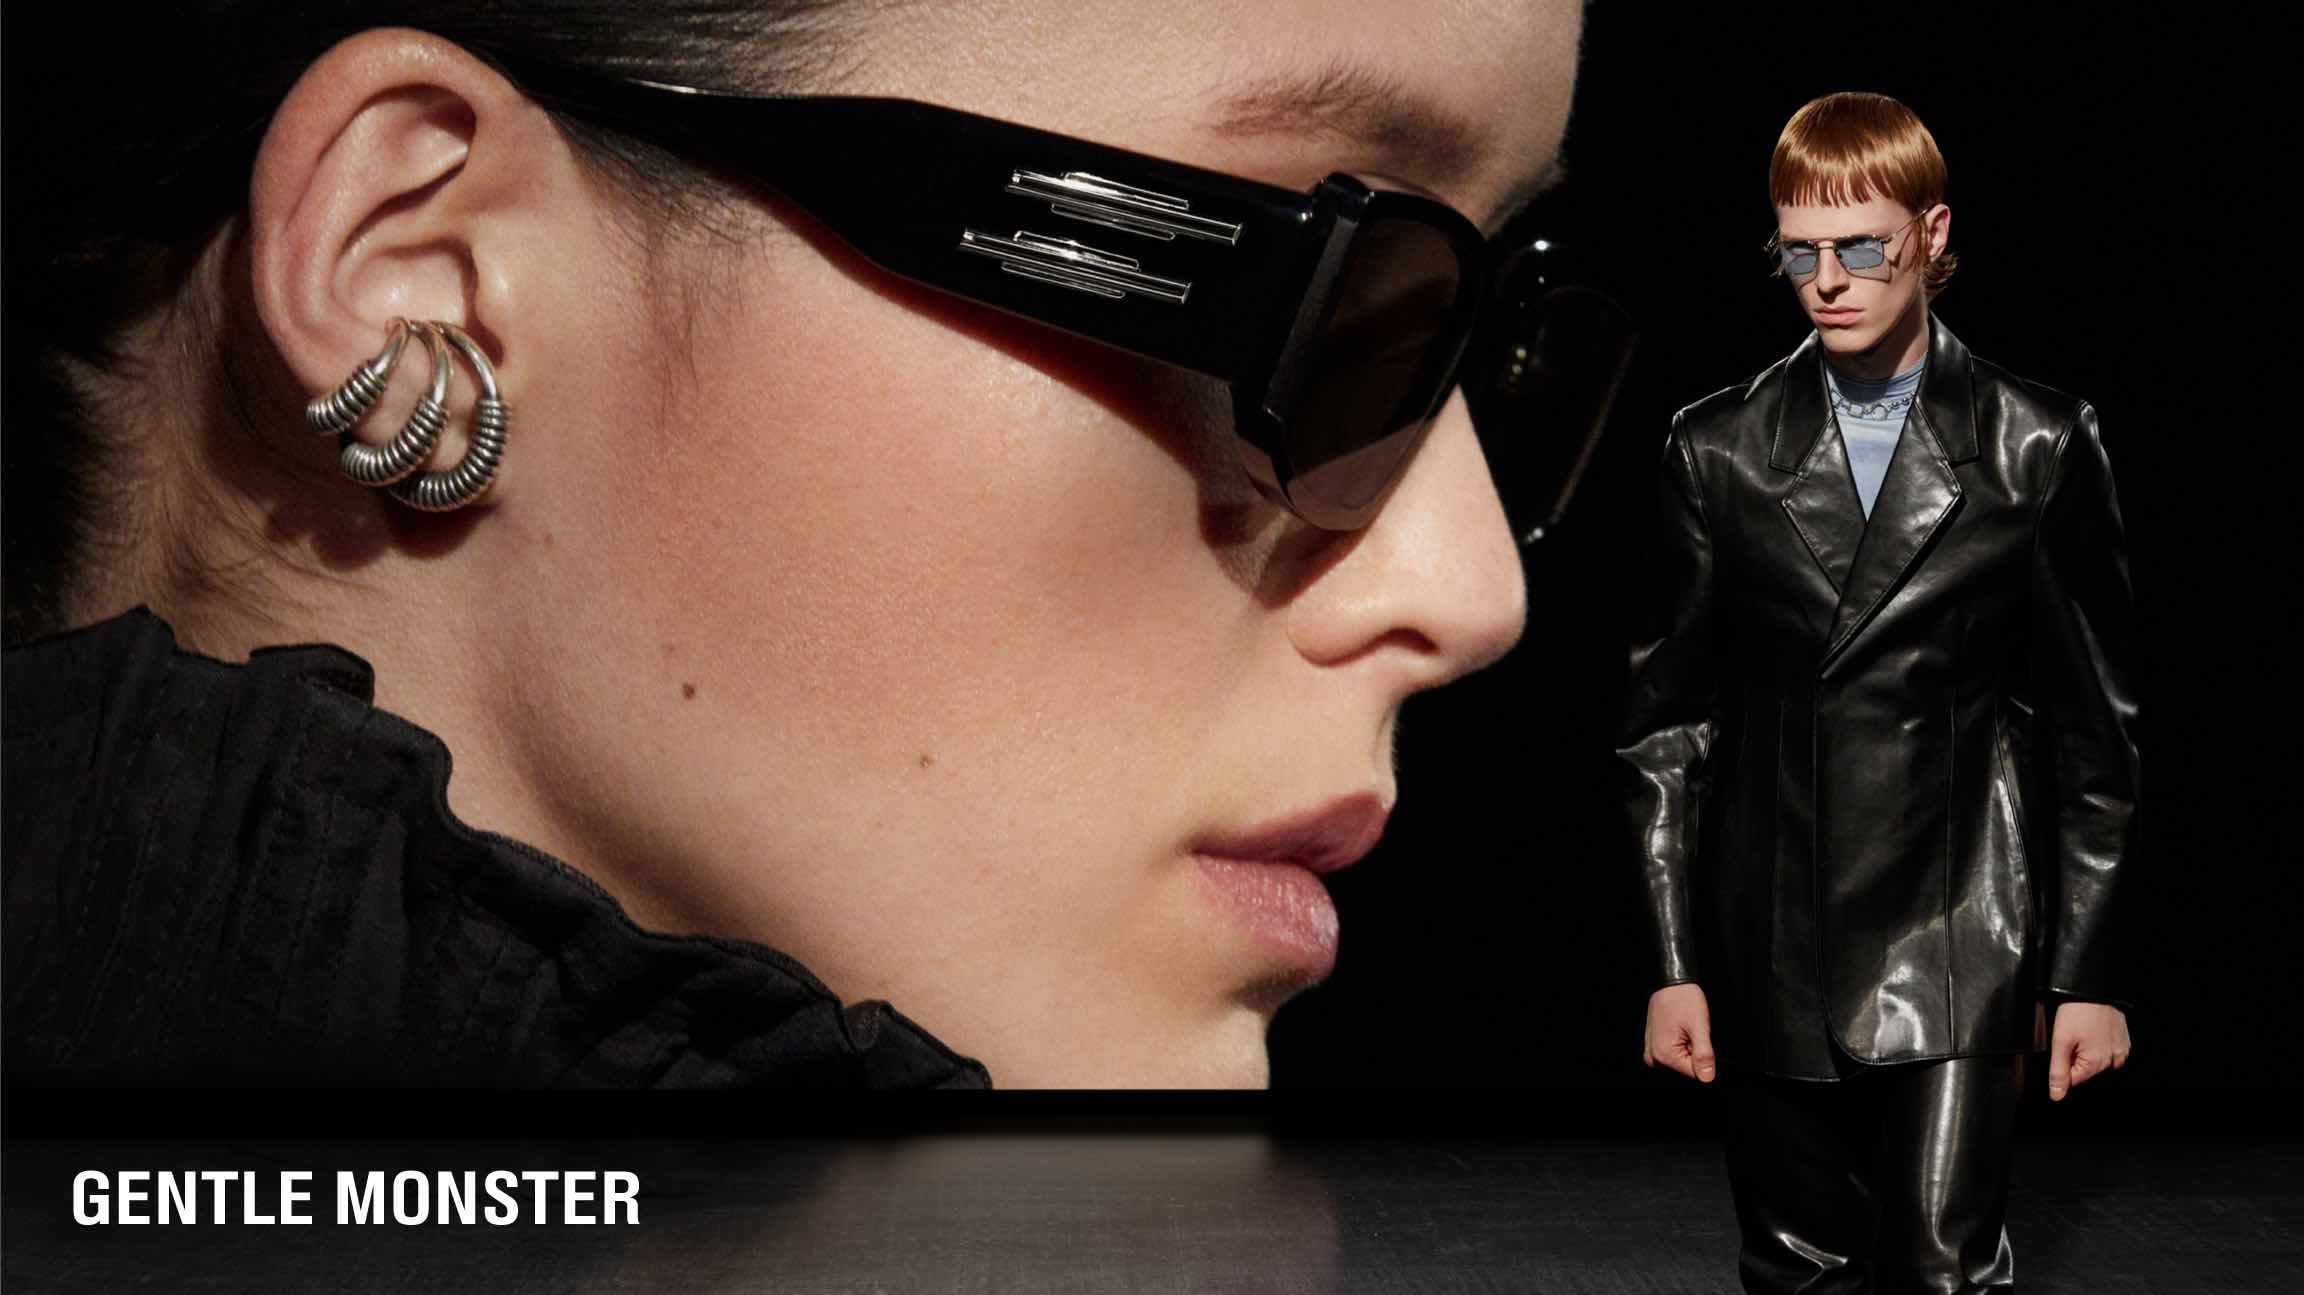 There's nothing gentle about the way Gentle Monster disrupted eyewear -  Culted